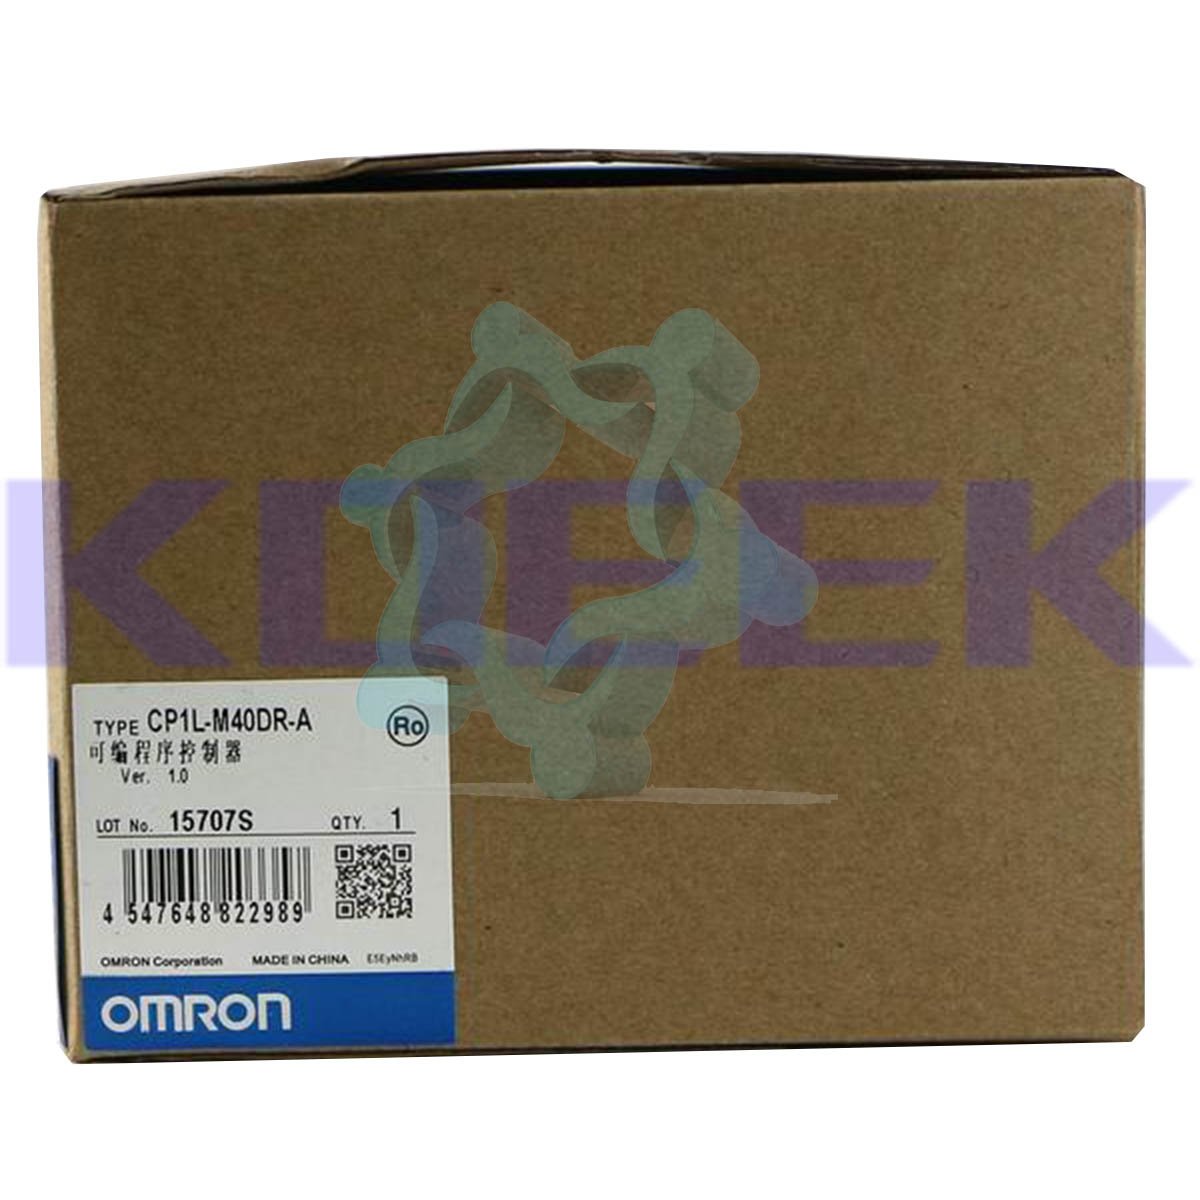 CP1L-M40DR-A KOEED 201-500, 80%, import_2020_10_10_031751, Omron, Other